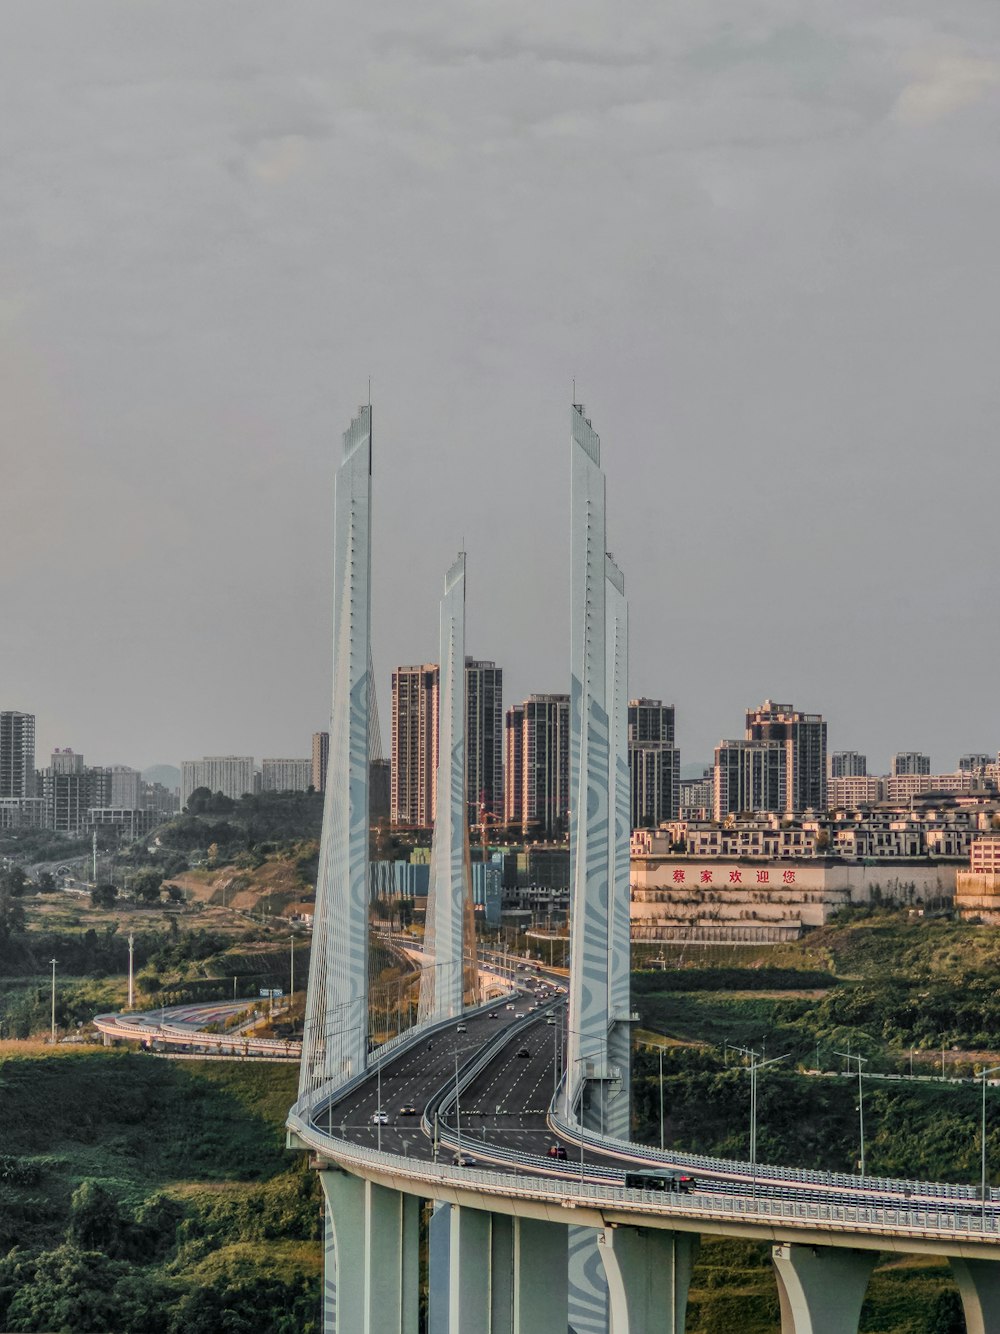 a view of a bridge with tall buildings in the background